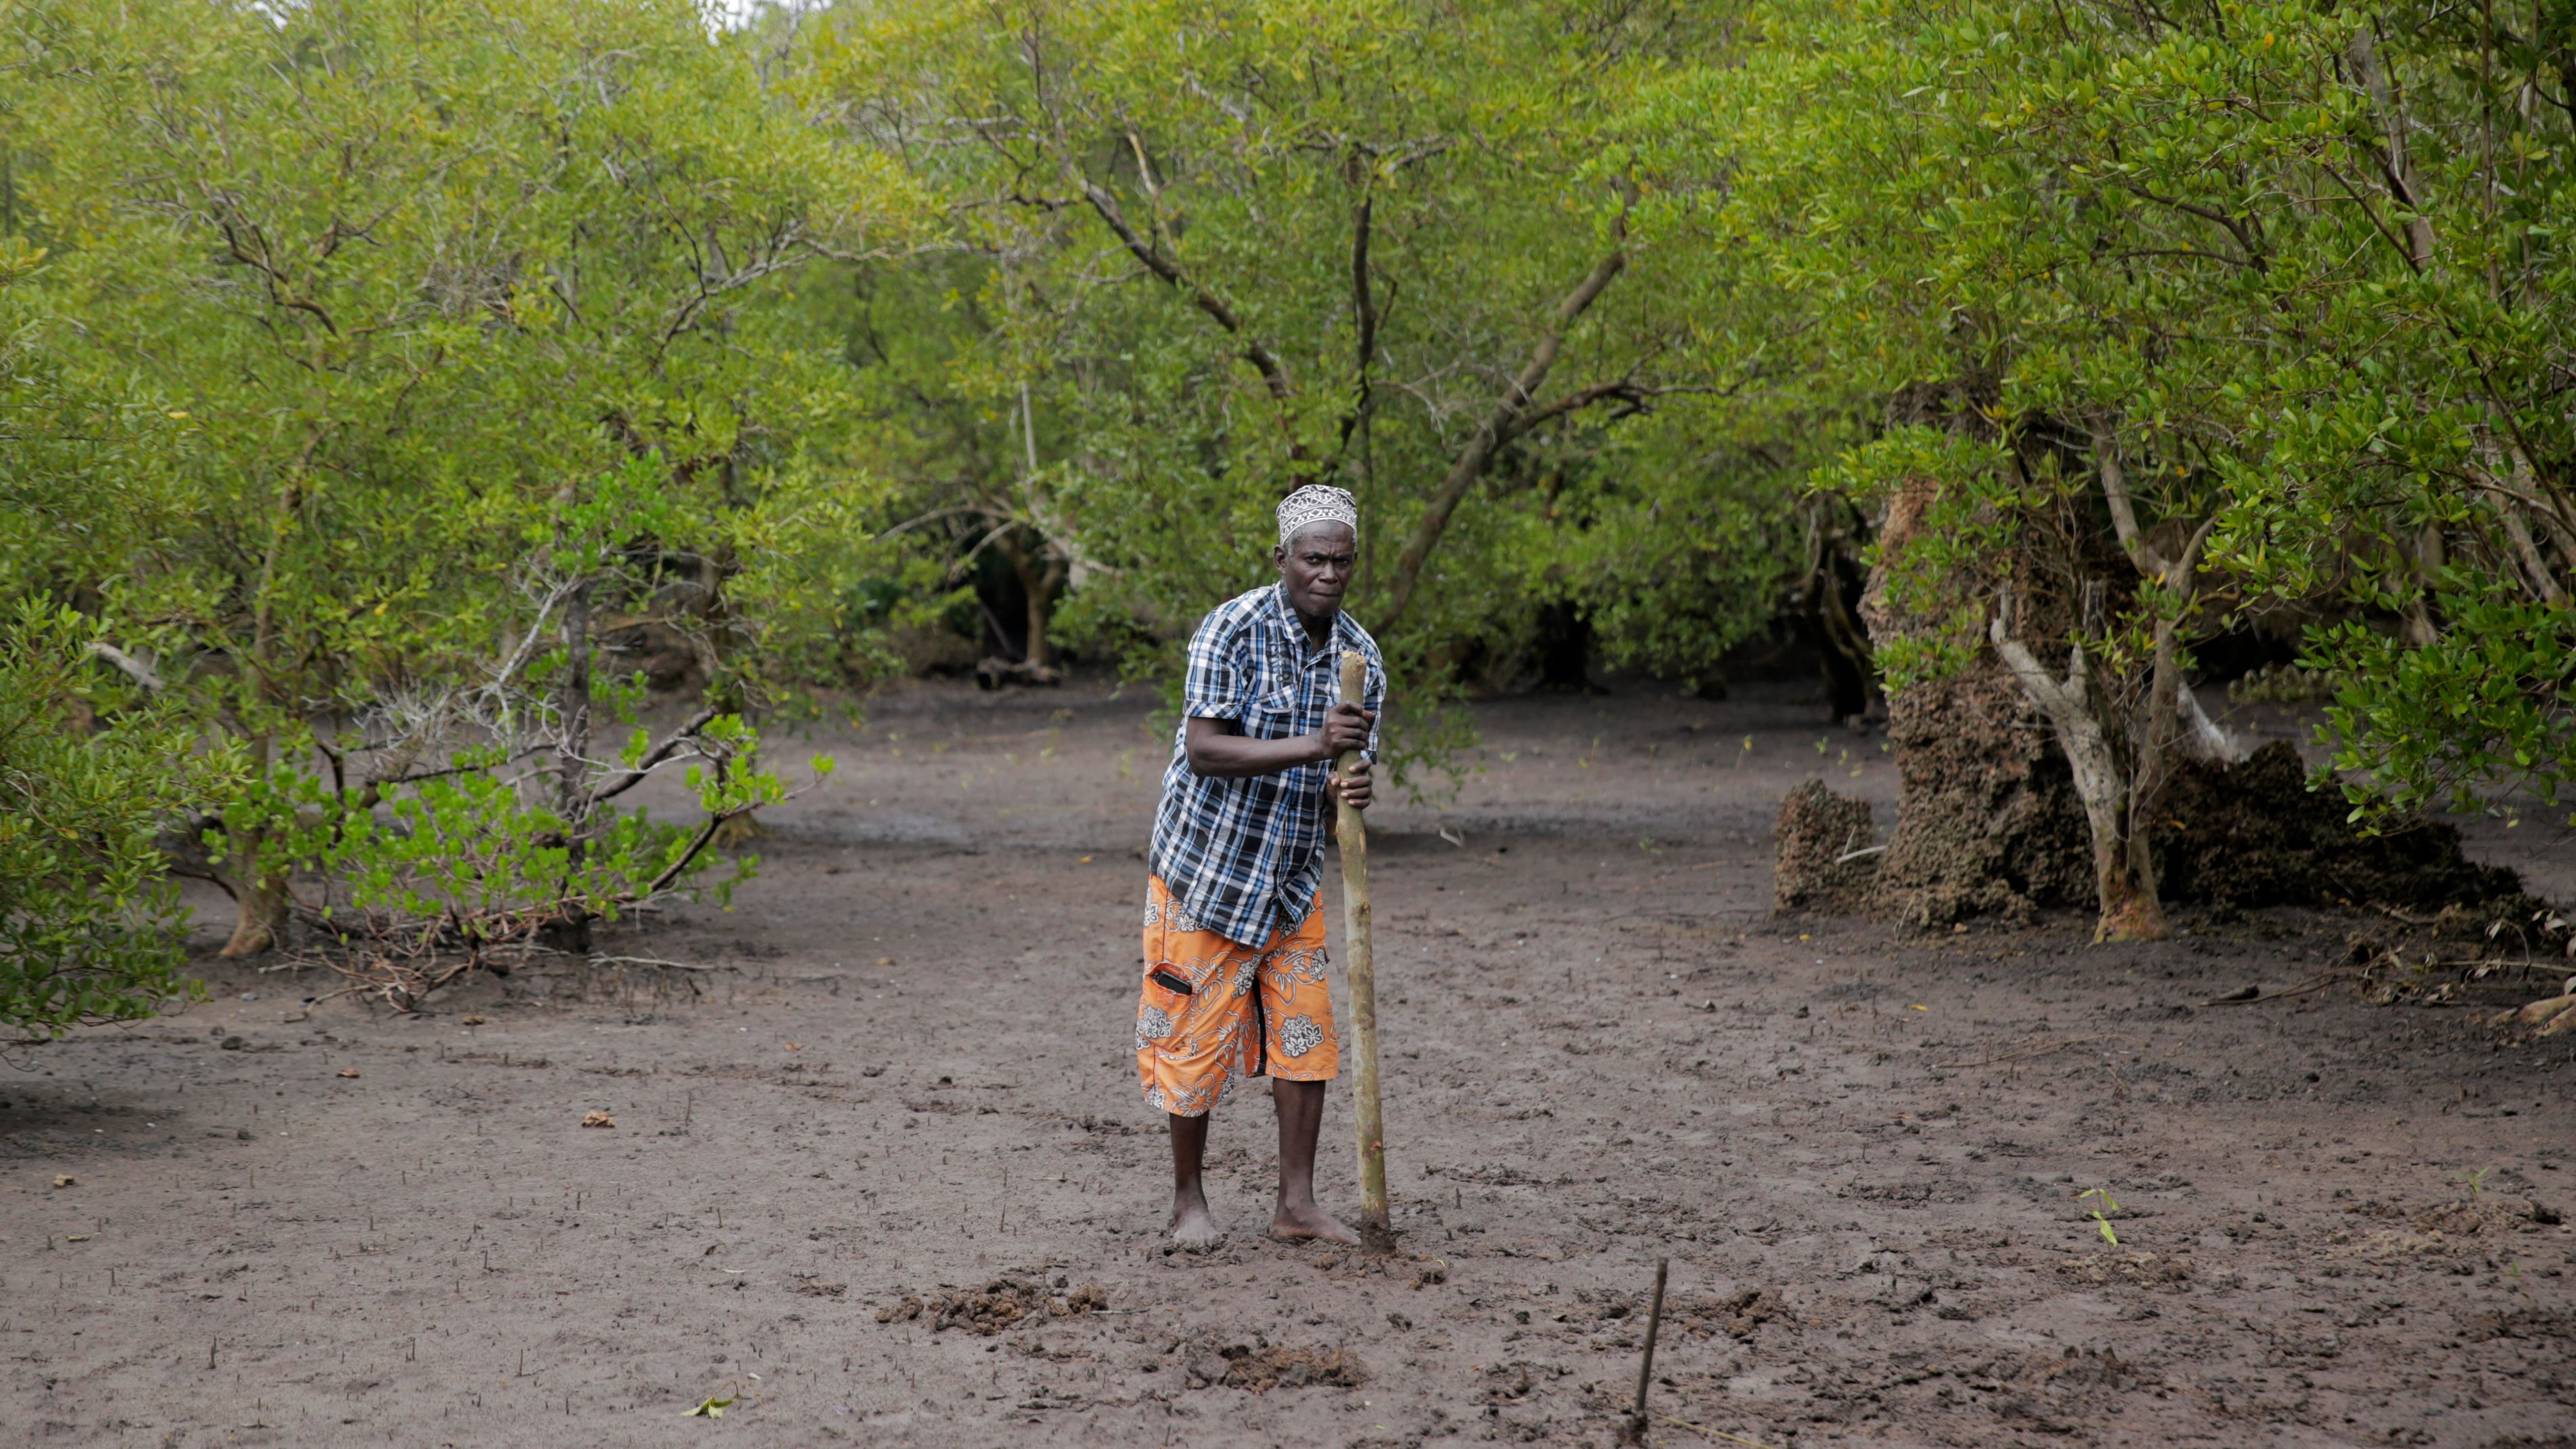 Community-led projects, such as Mikoko Pamoja in Gazi Bay, Kenya have helped to restore degraded mangrove ecosystems. /Brian Inganga/AP